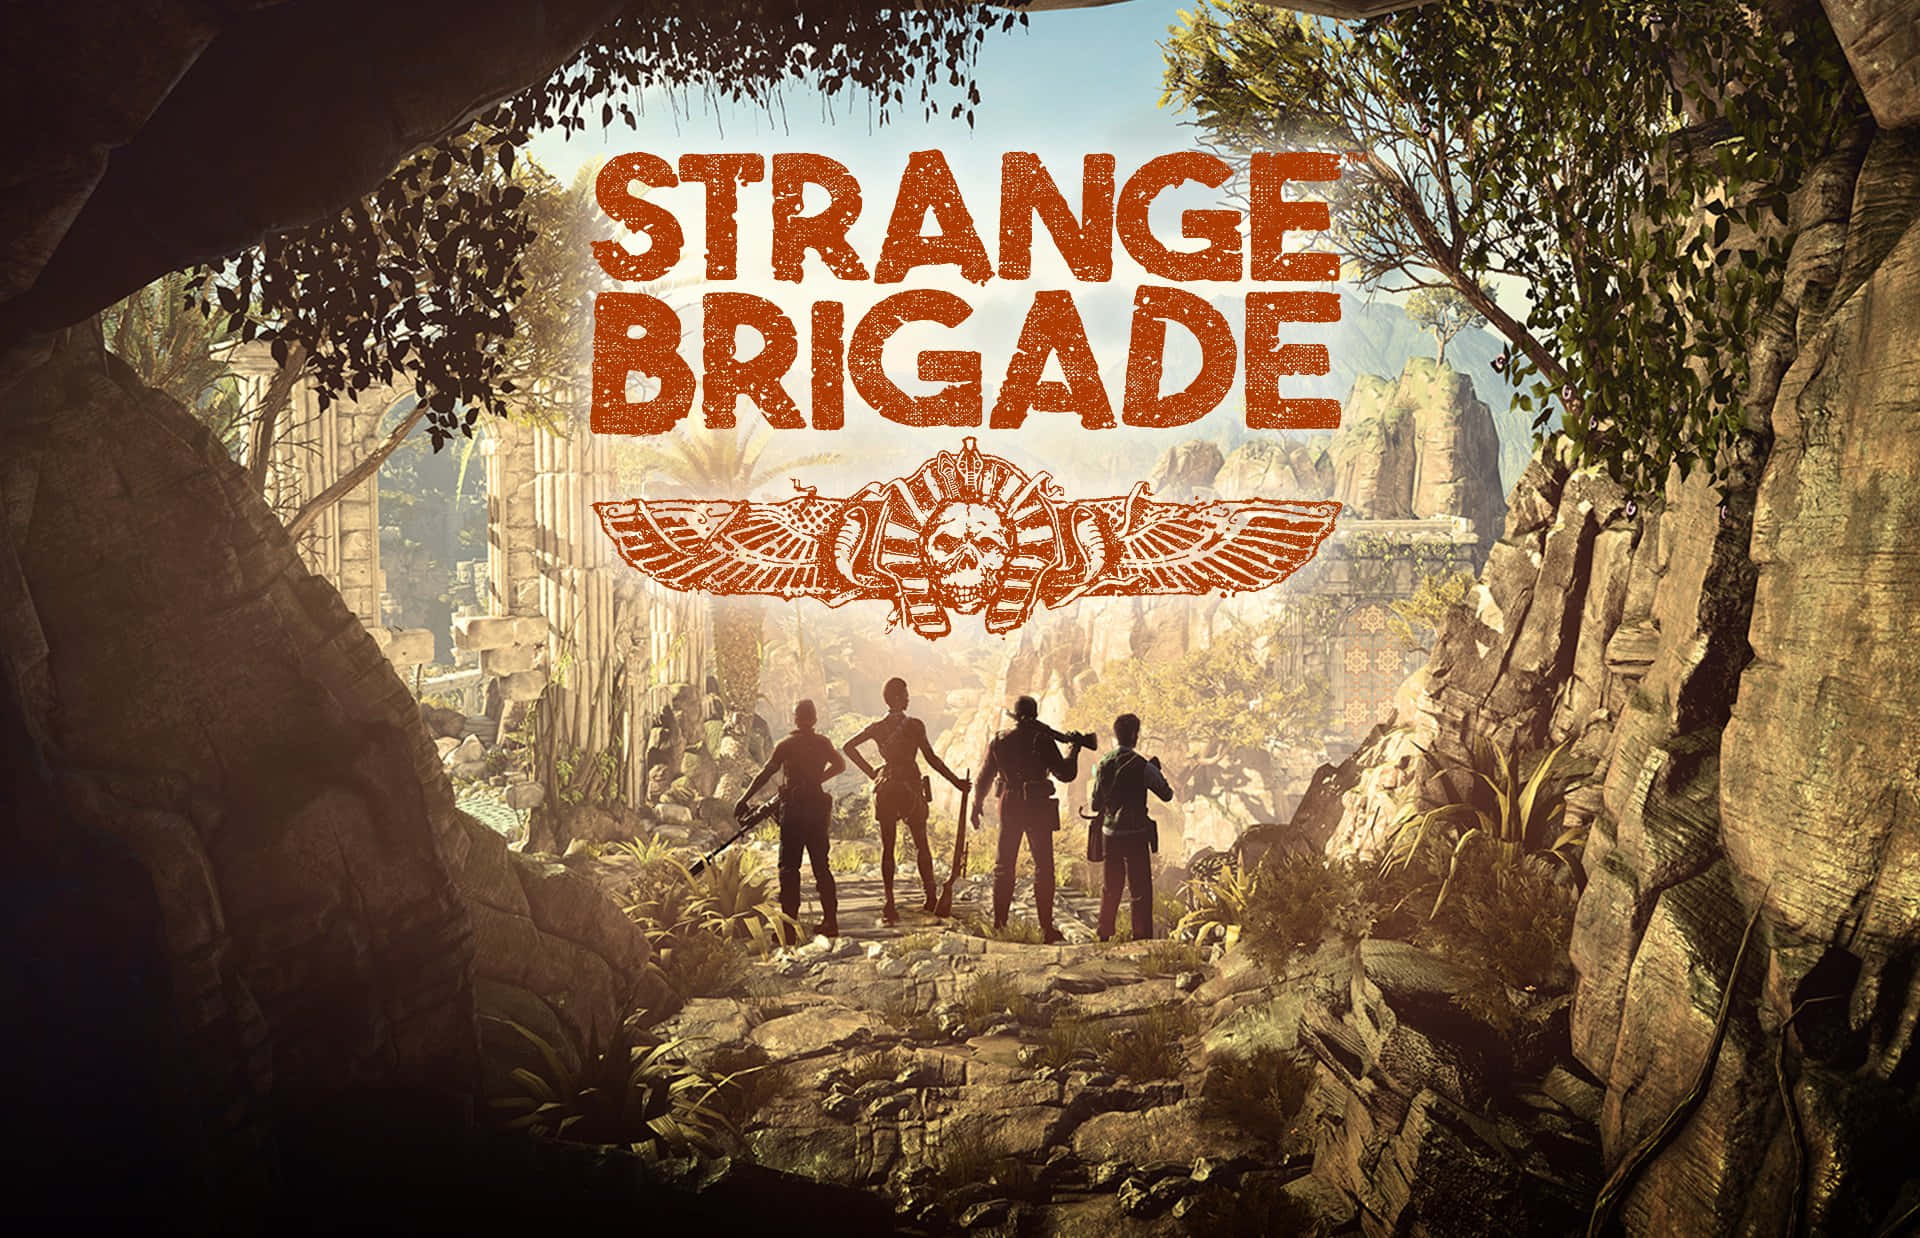 Join the Strange Brigade and Explore Exotic Locations